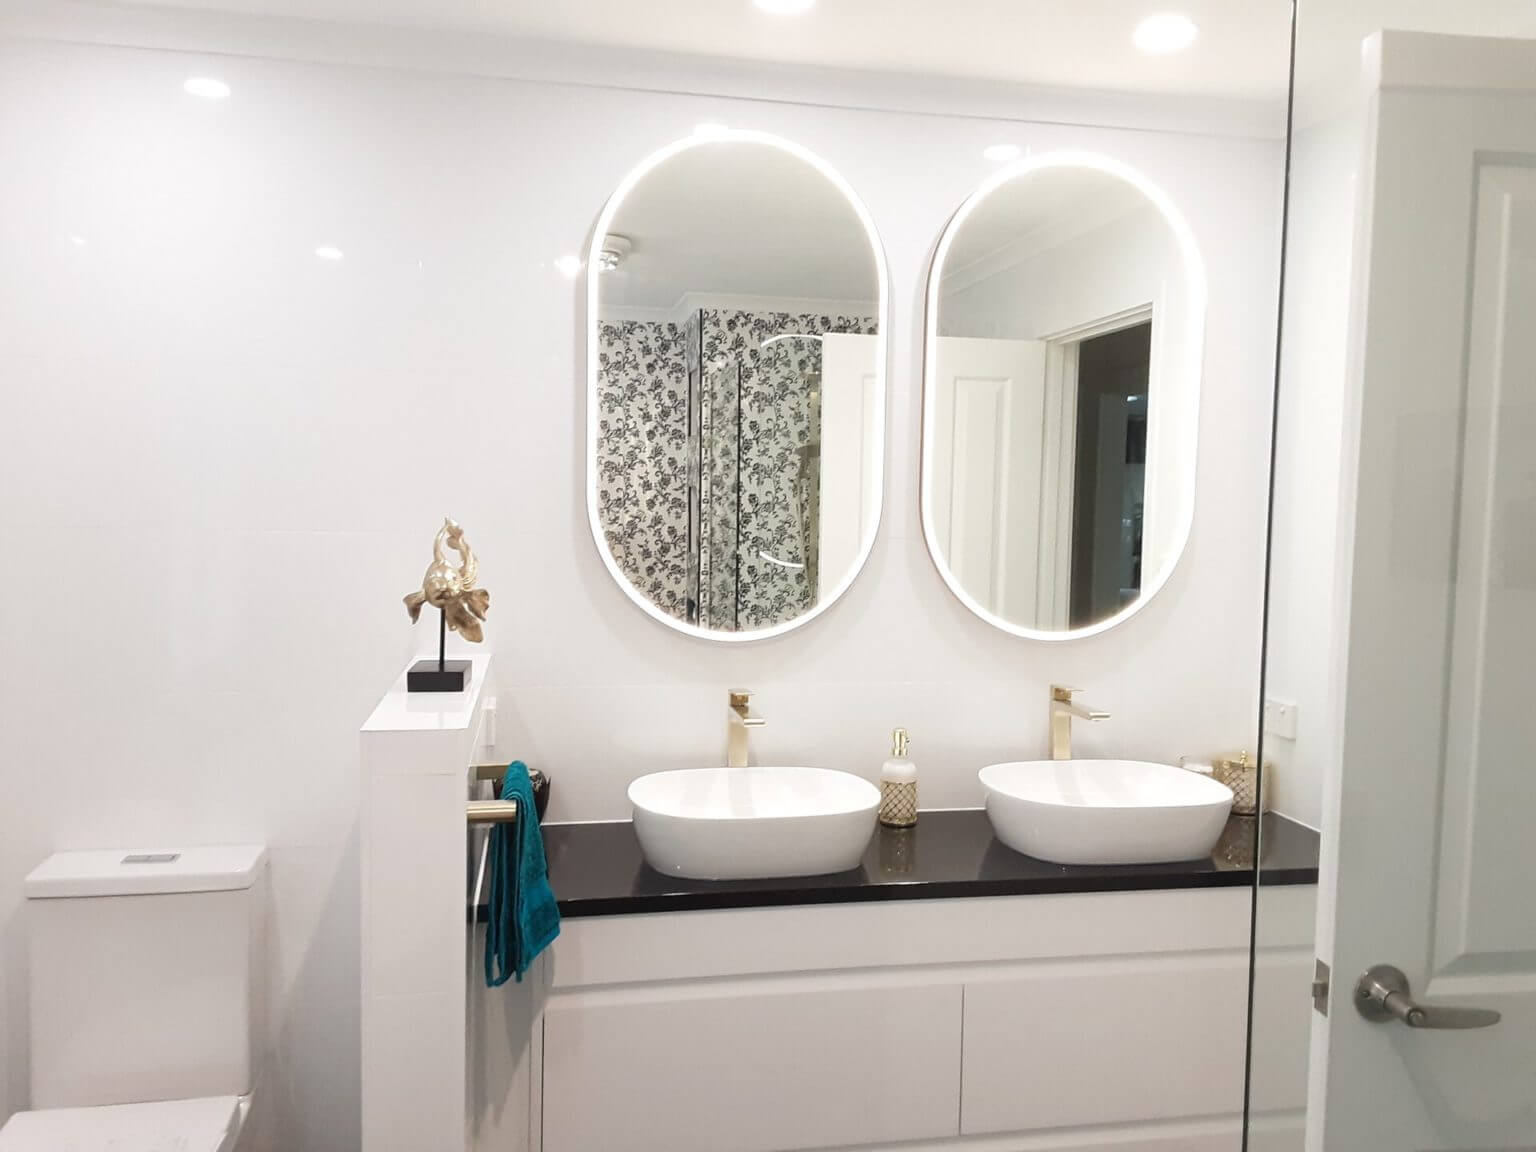 A finished bathroom renovation in Adelaide